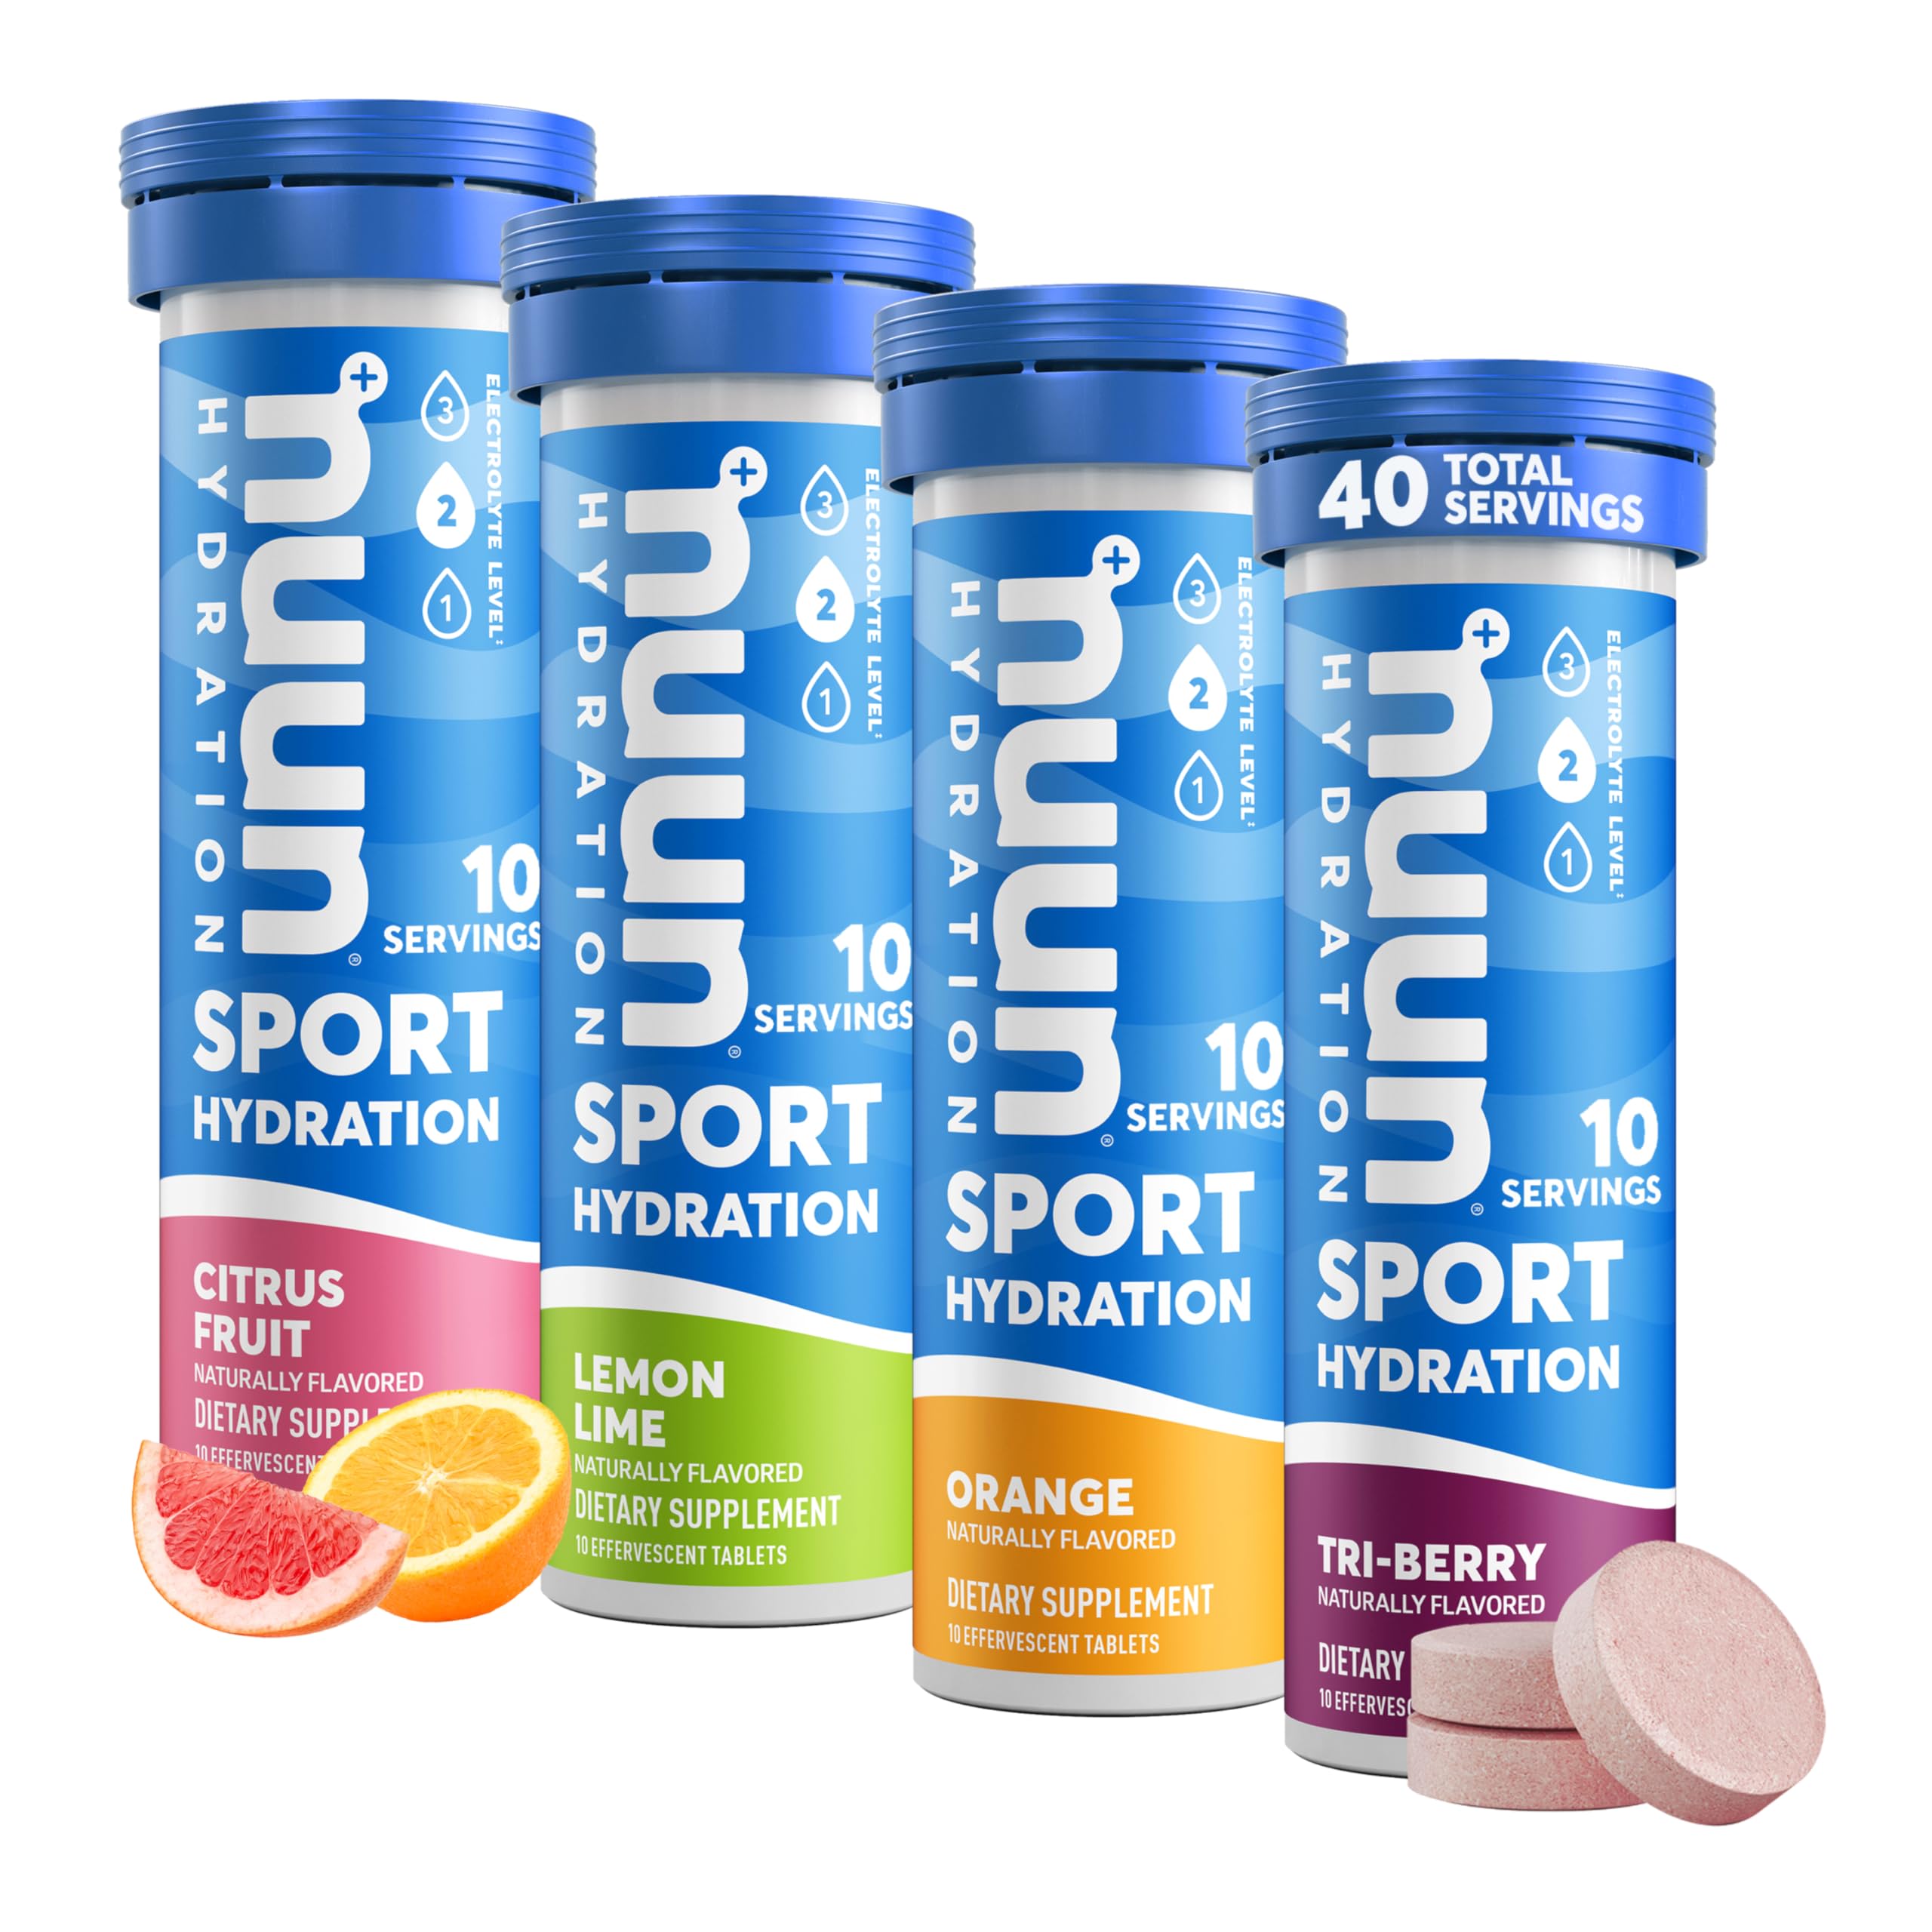 4-Tubes Nuun Hydration Electrolyte Drink Tablets (40 Servings, Citrus/Berry) $15.05 w/ S&S + Free Shipping w/ Prime or $35+